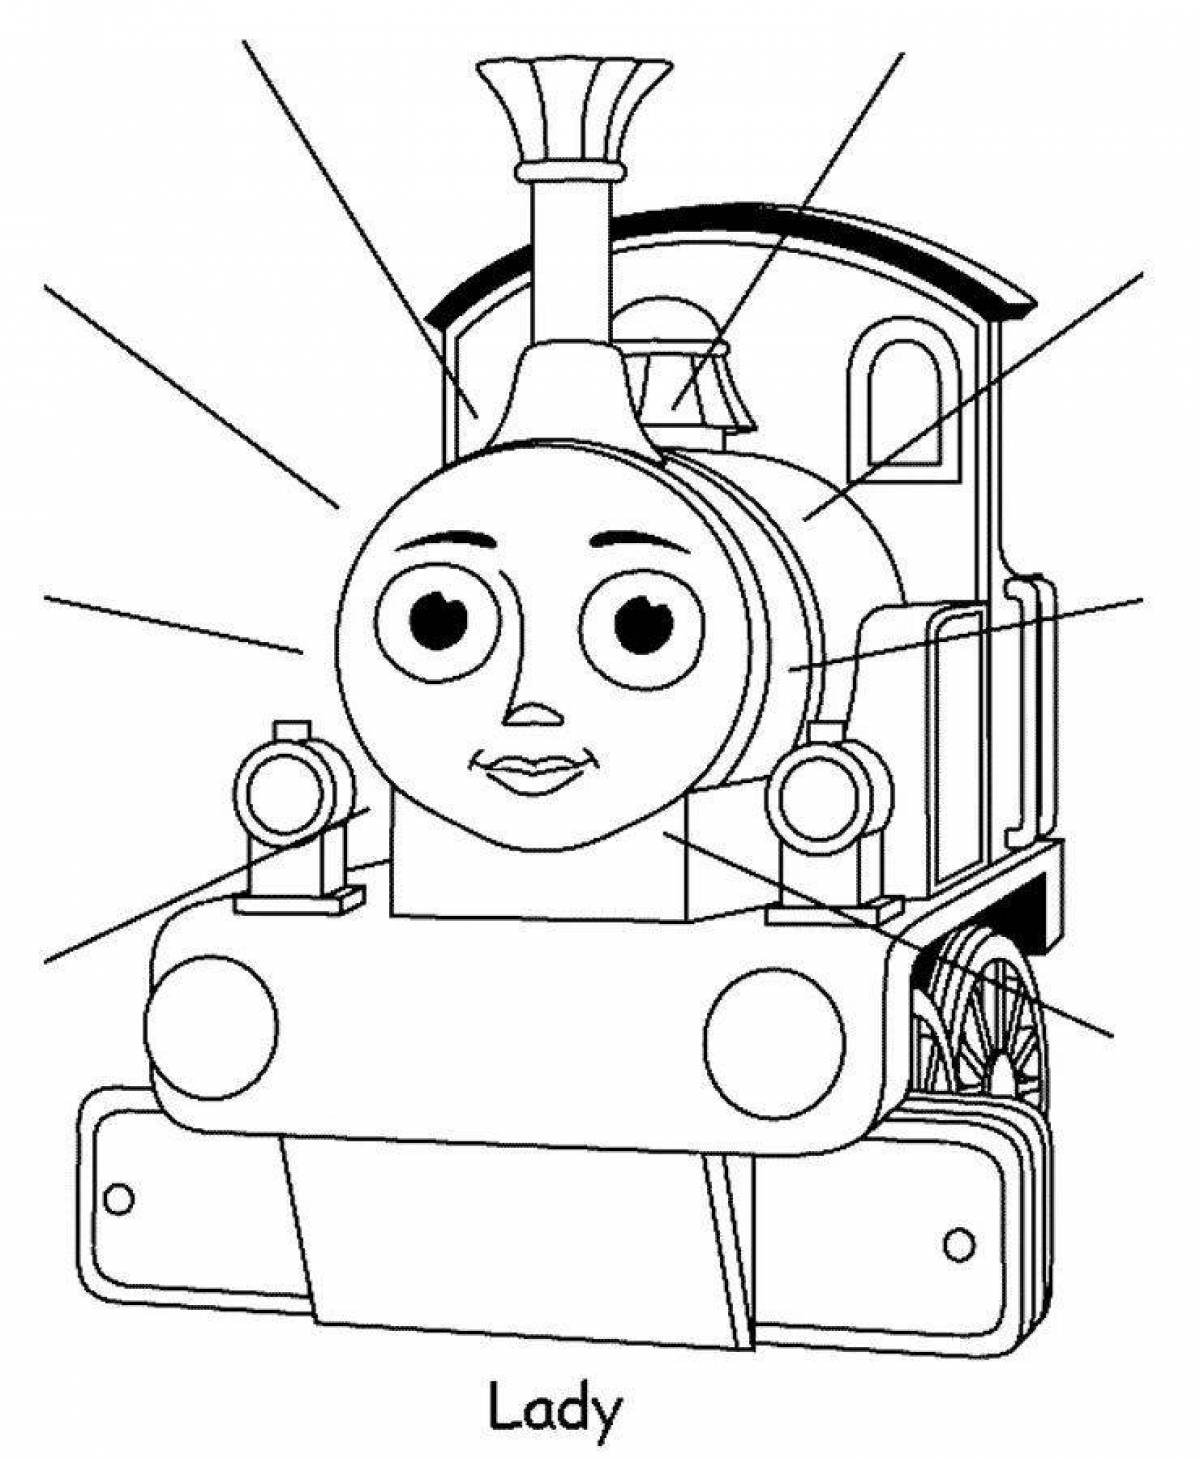 Coloring page playful charles the engine